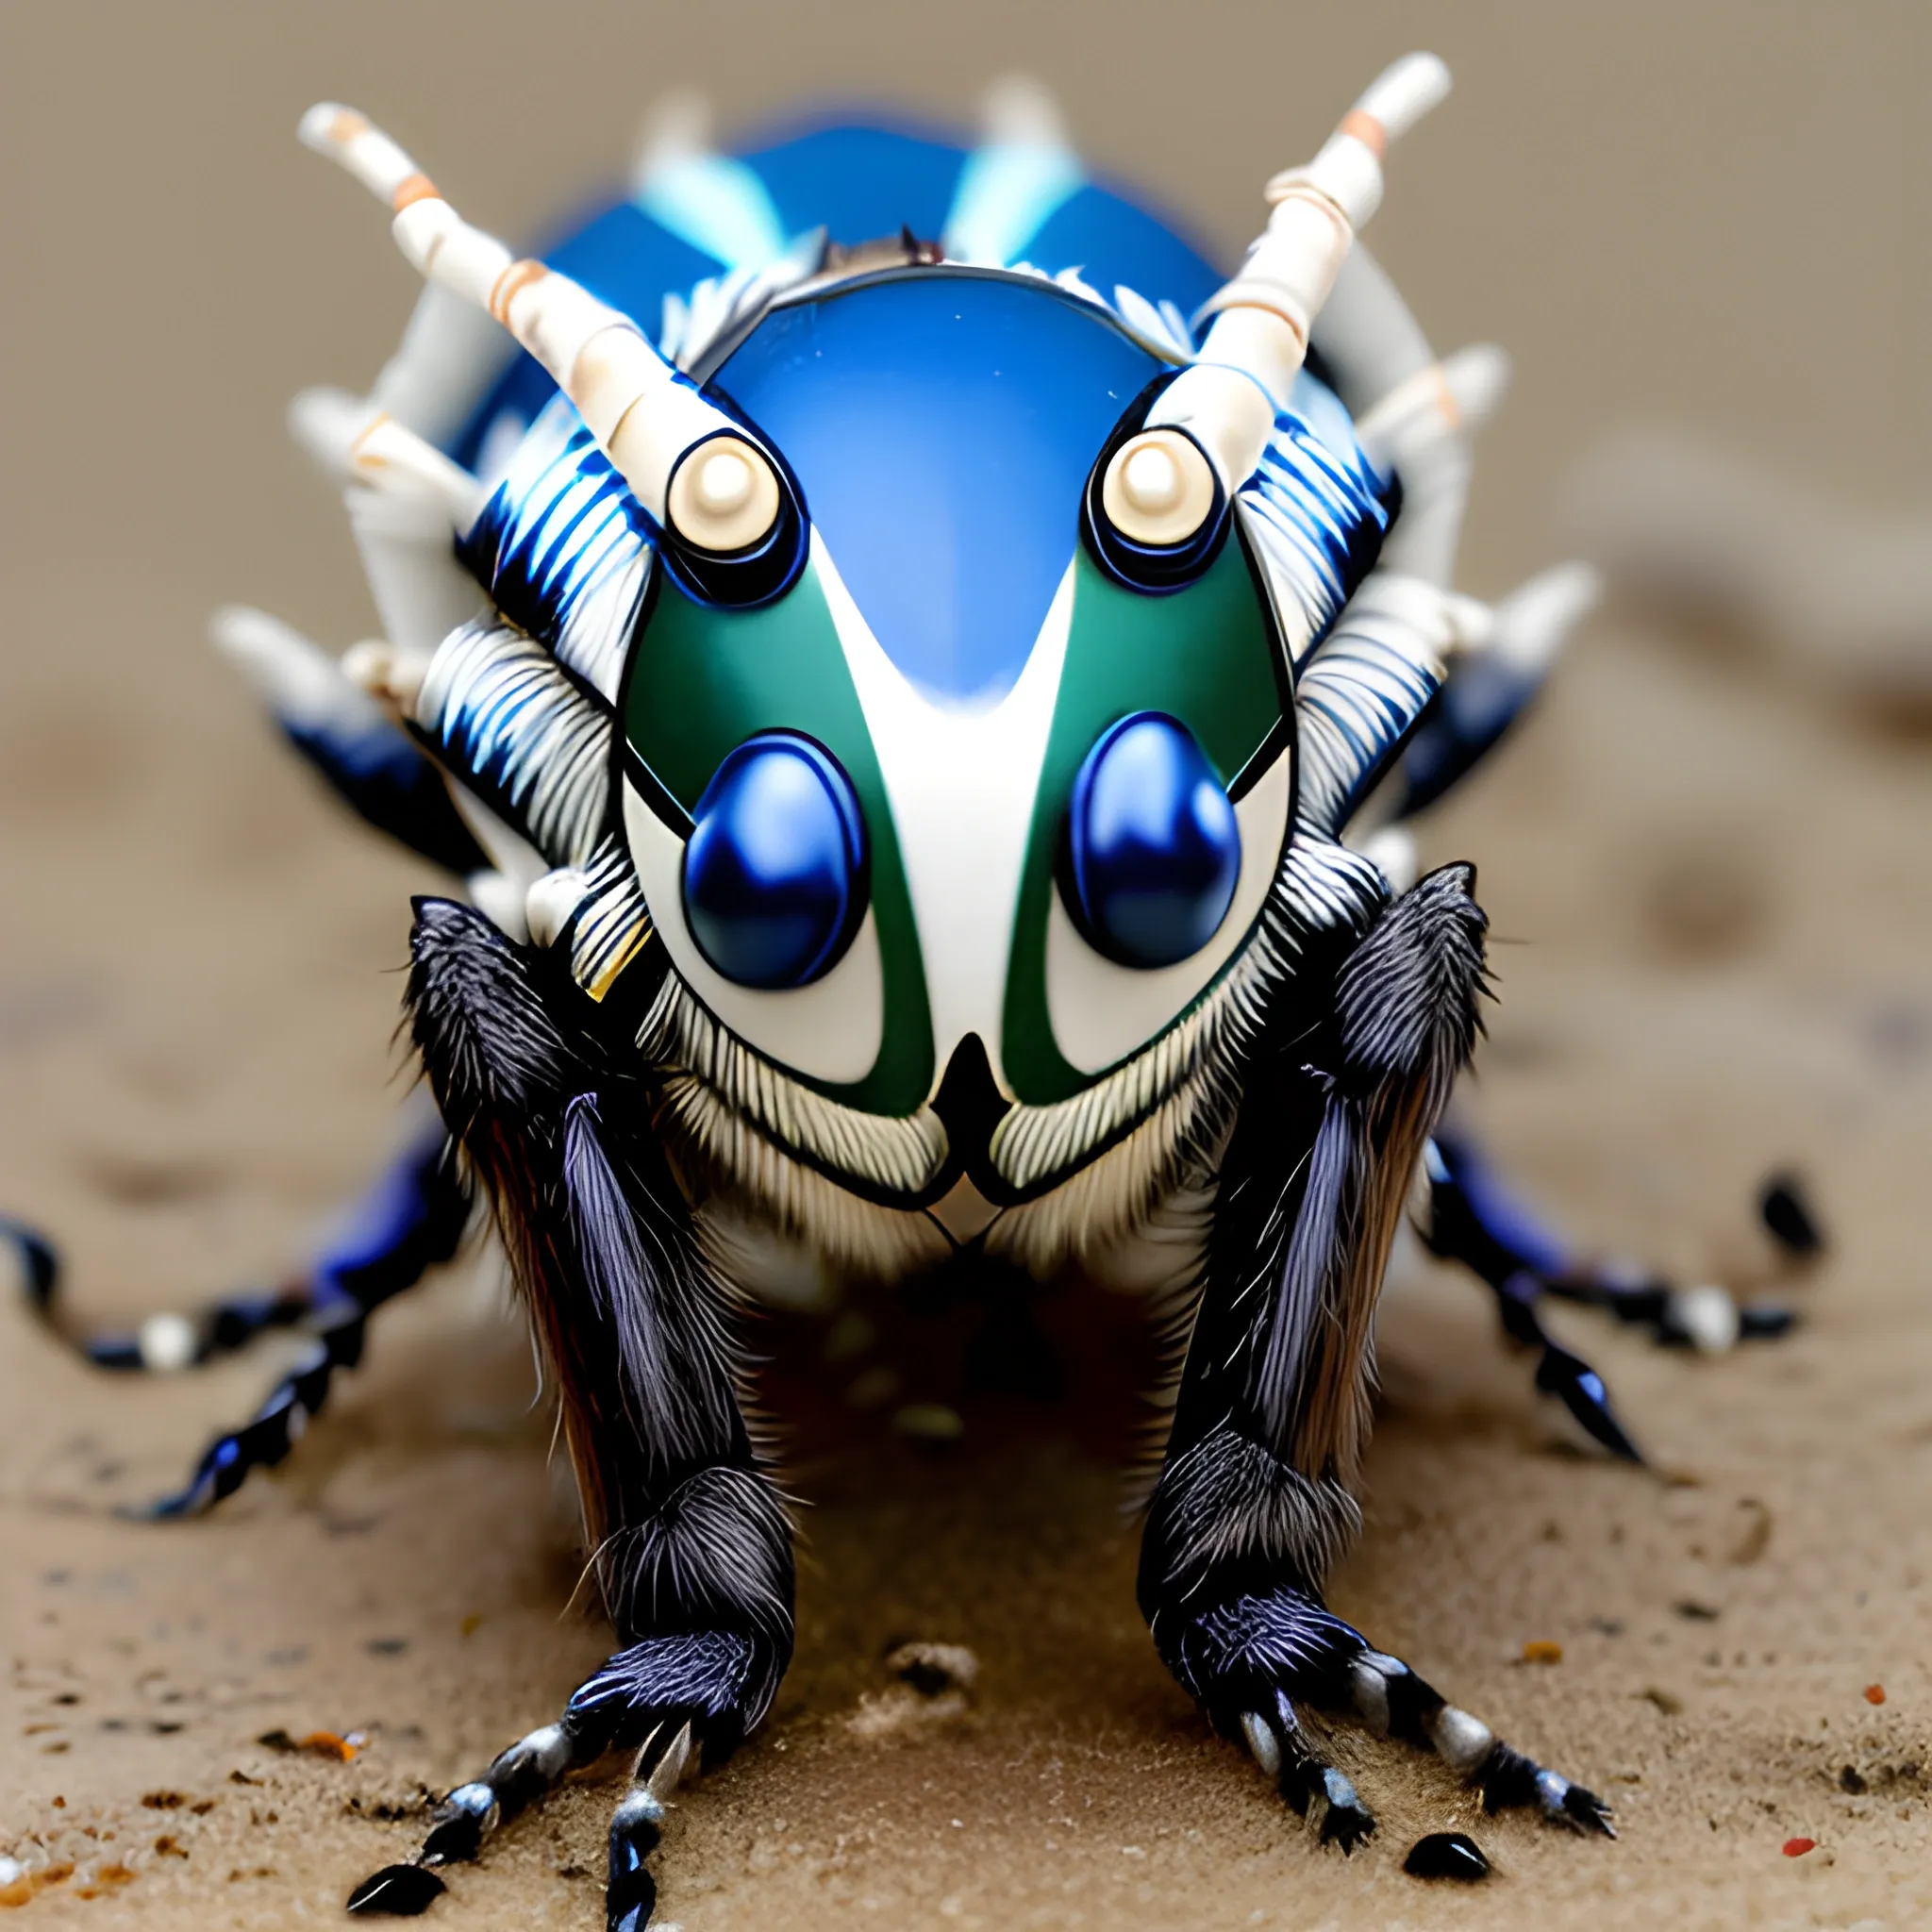 Insectile furry feline hybrid of kitten and cat and housefly, with blue and green and white stripes, with predatory mandibles and segmented body and six jointed legs with tube feet, on a muddy beach, very detailed